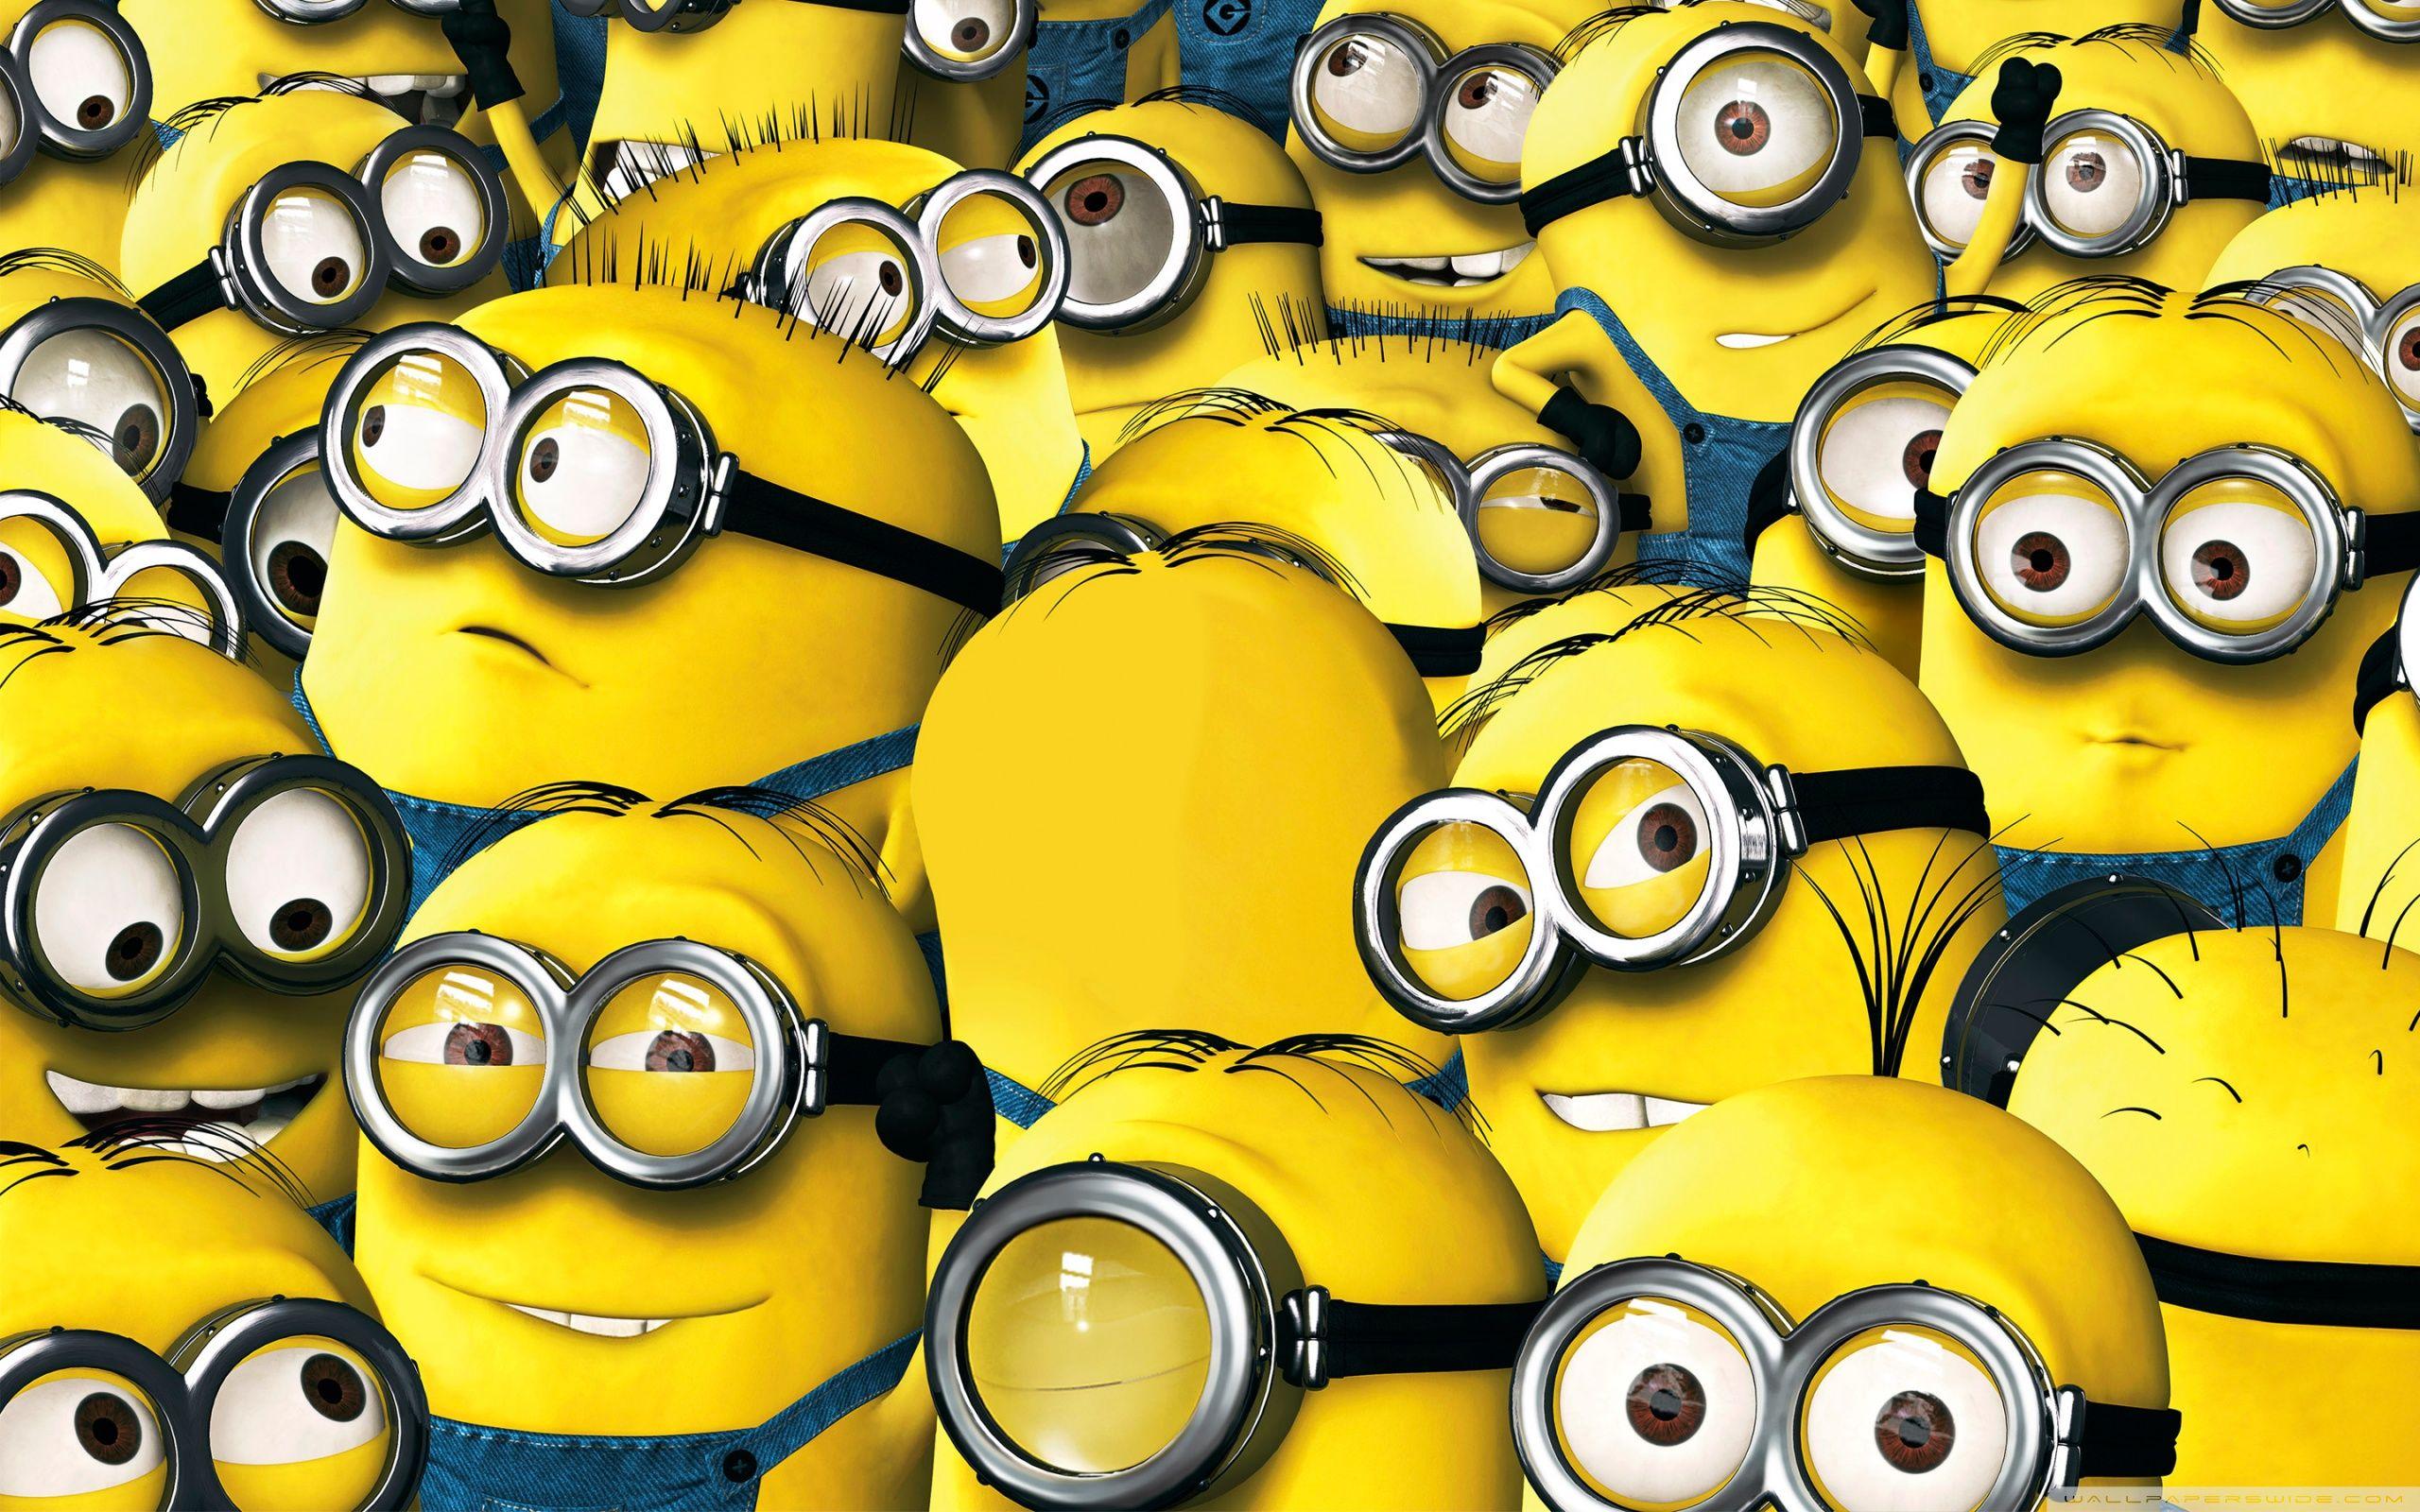 Wallpapers Minion - Wallpaper Cave